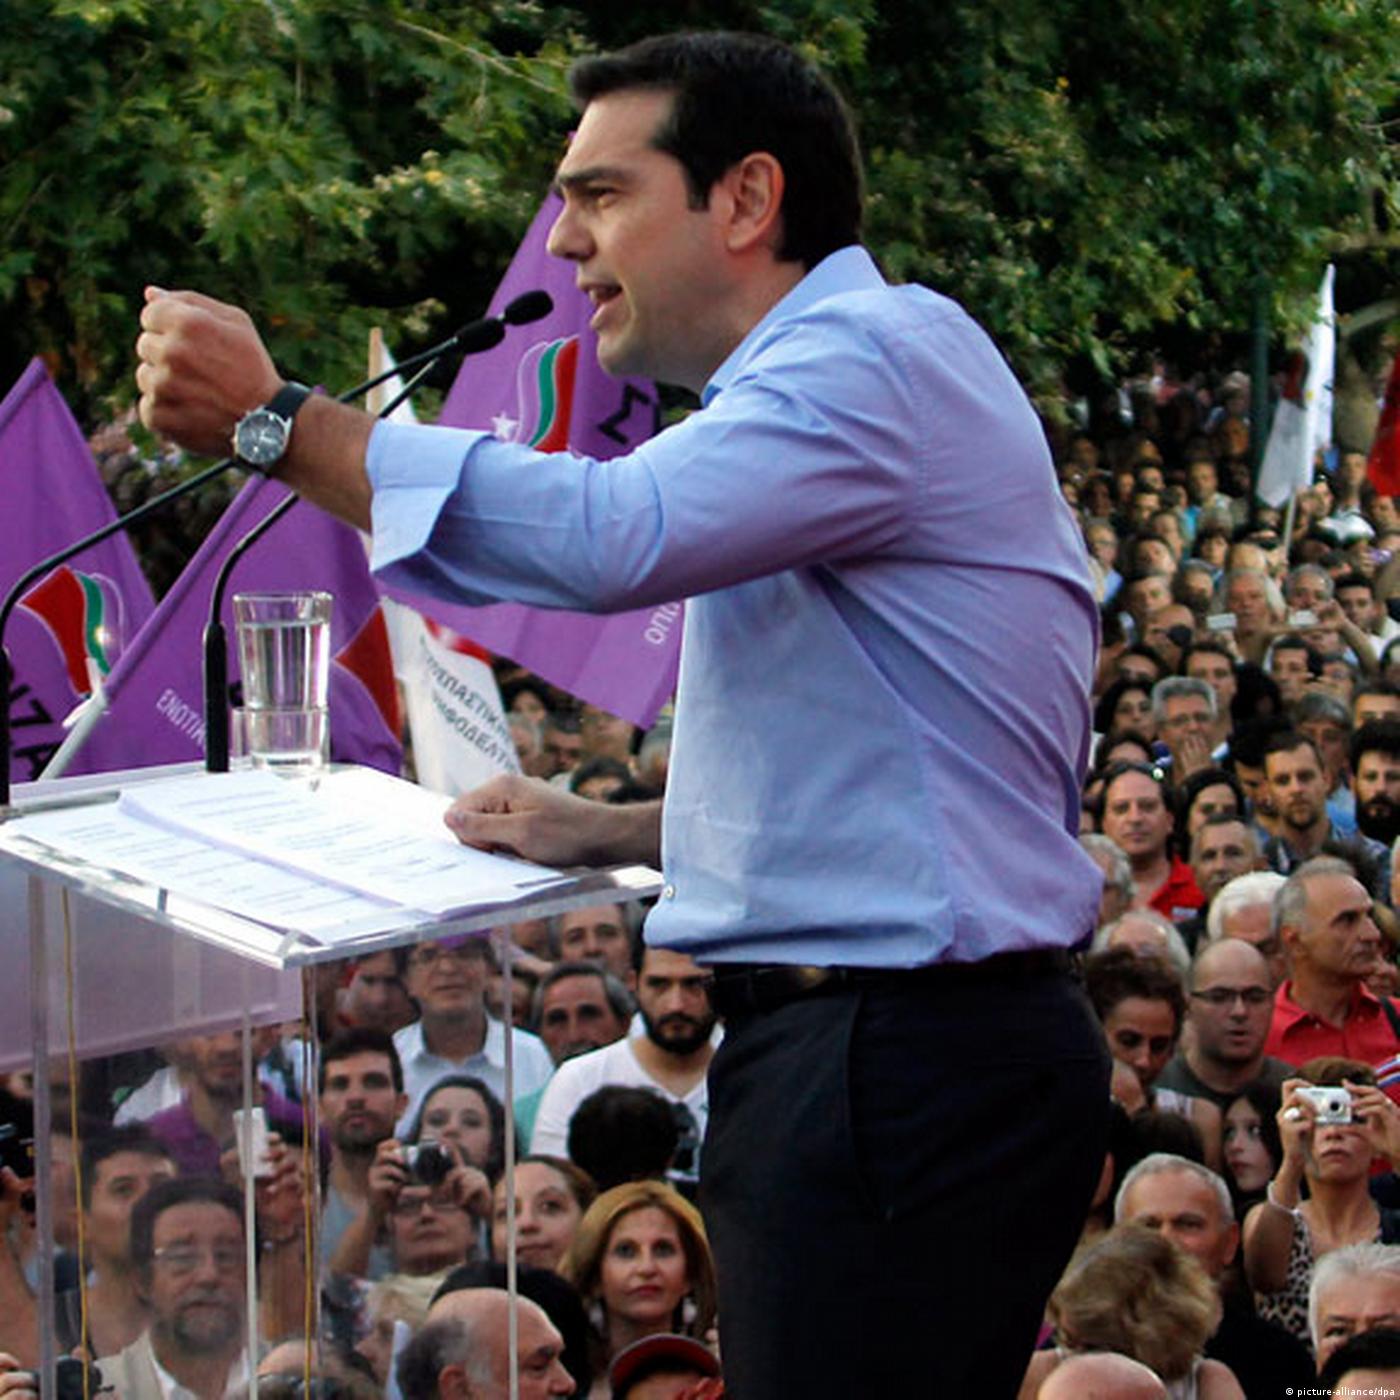 Greece: Europe Moves to the Left